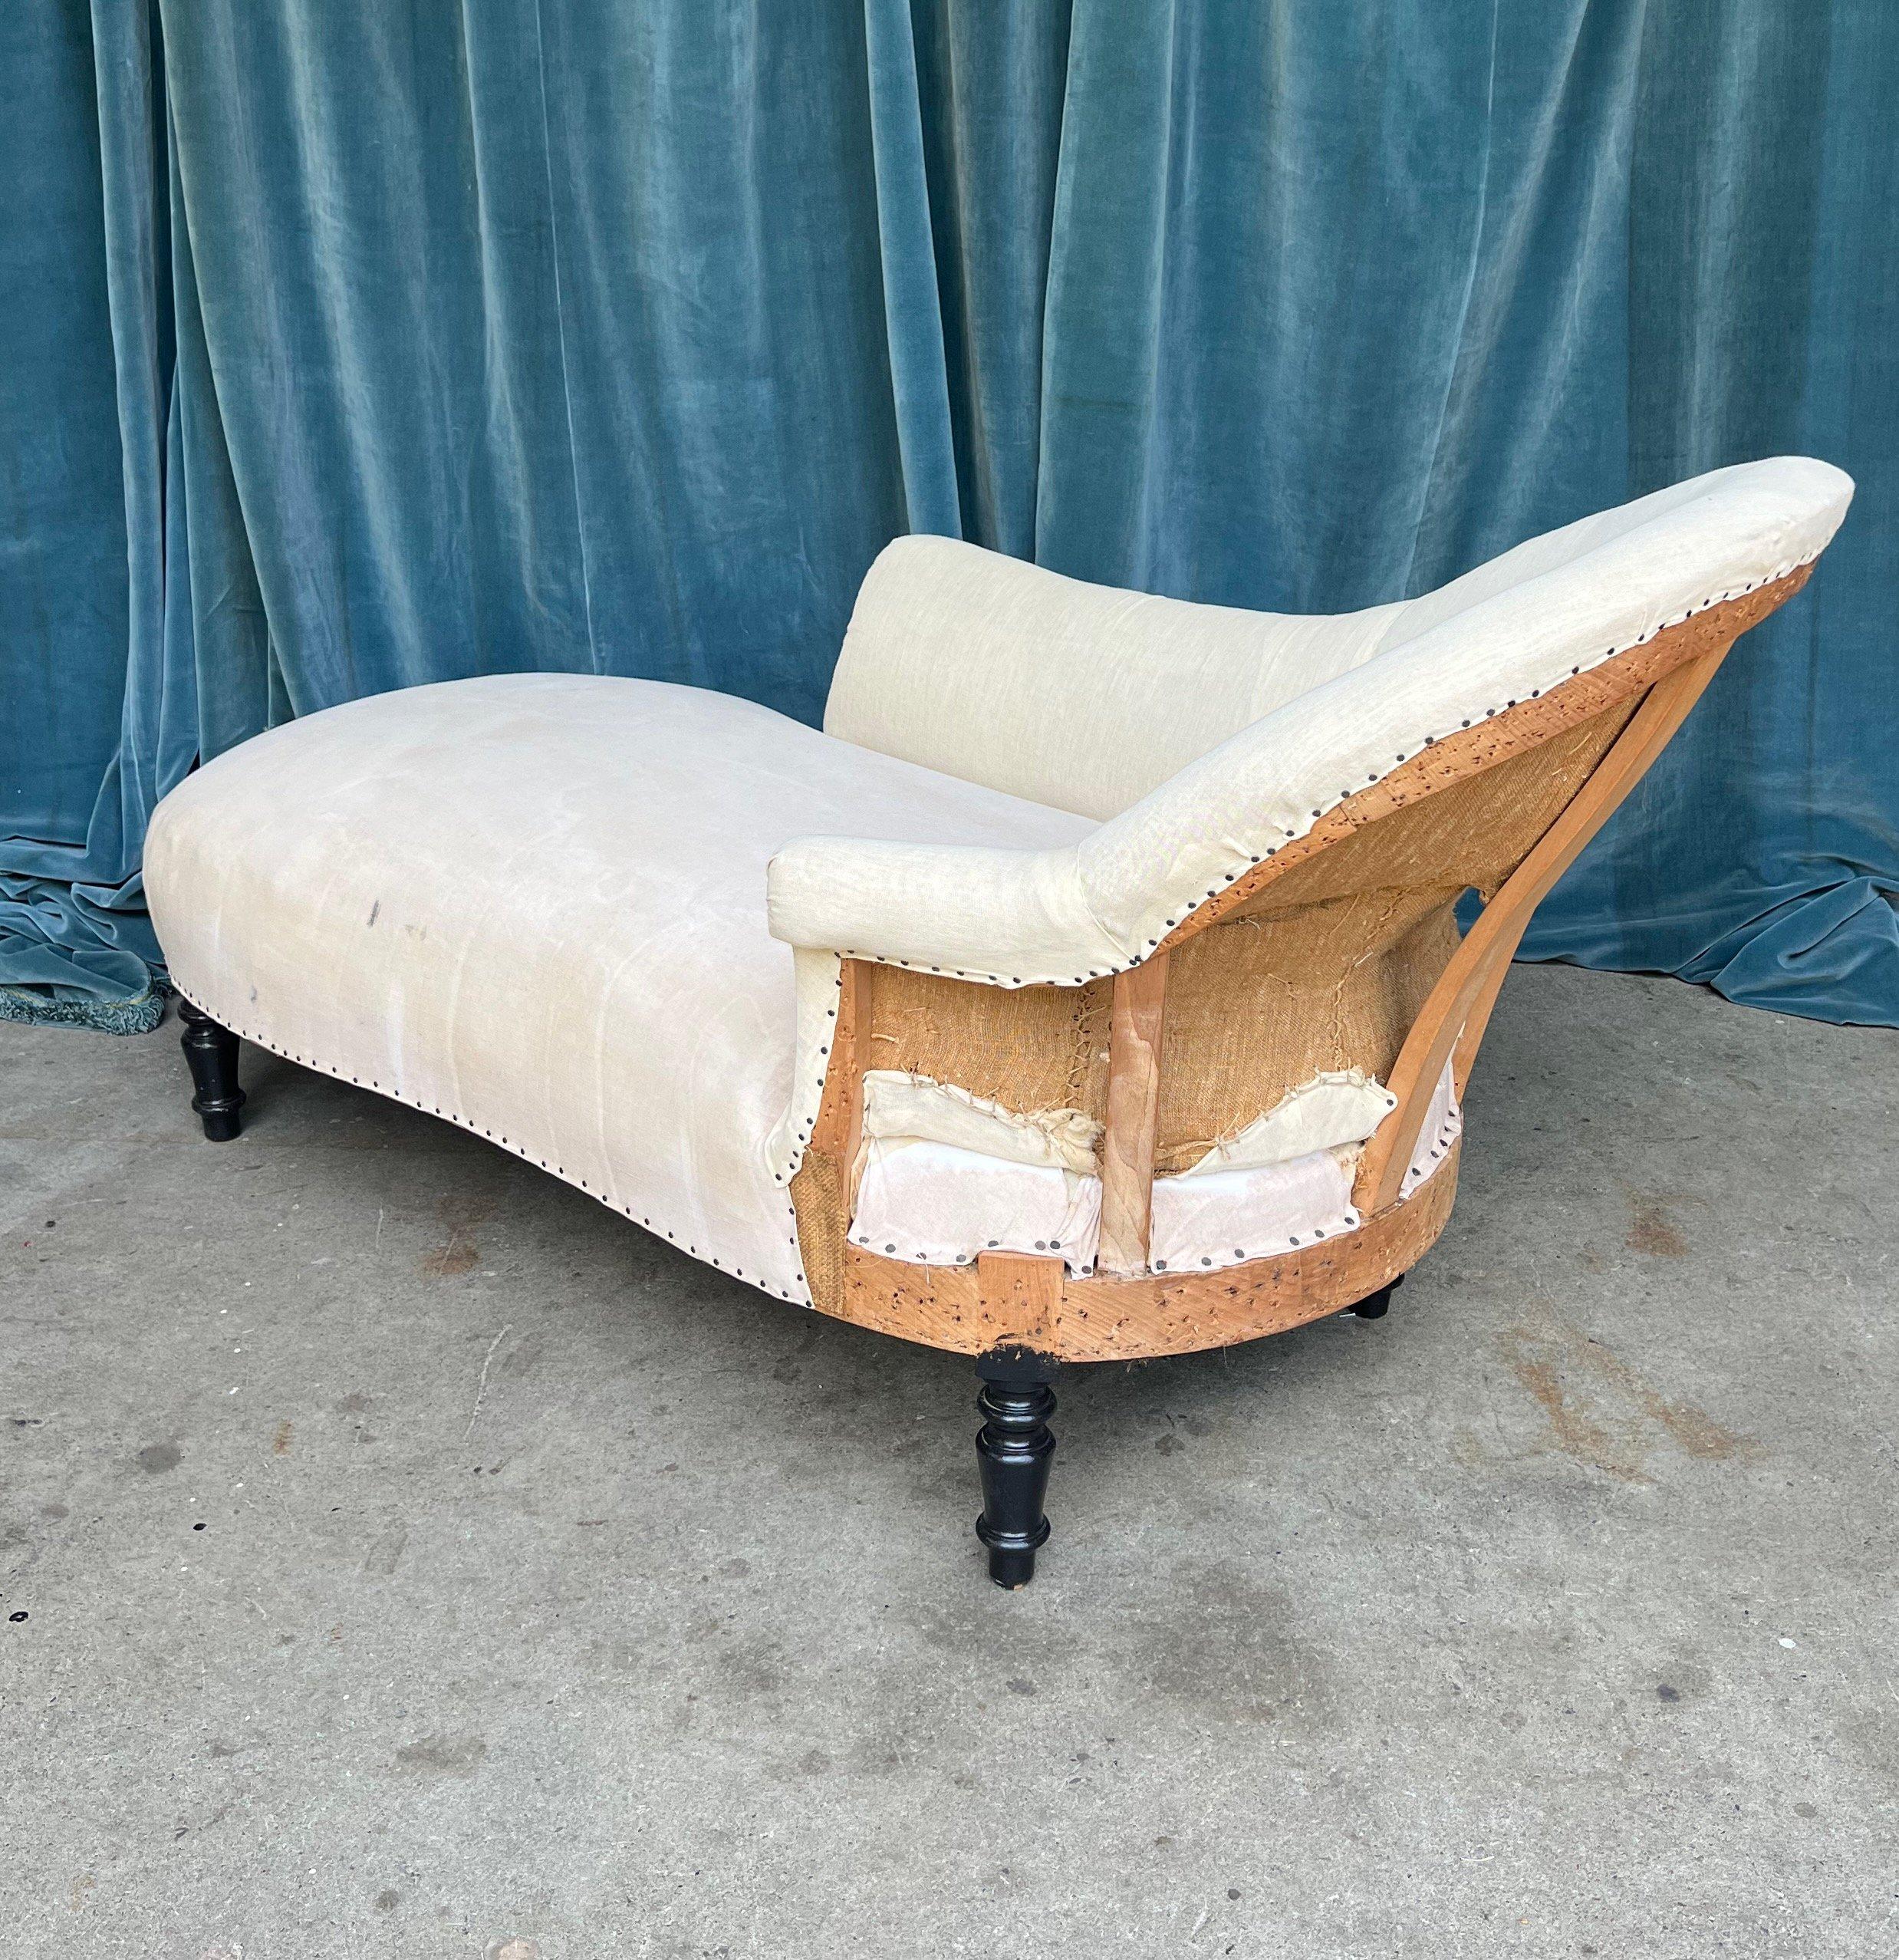 Upholstery French 19th Century Chaise Lounge with Extended Arm